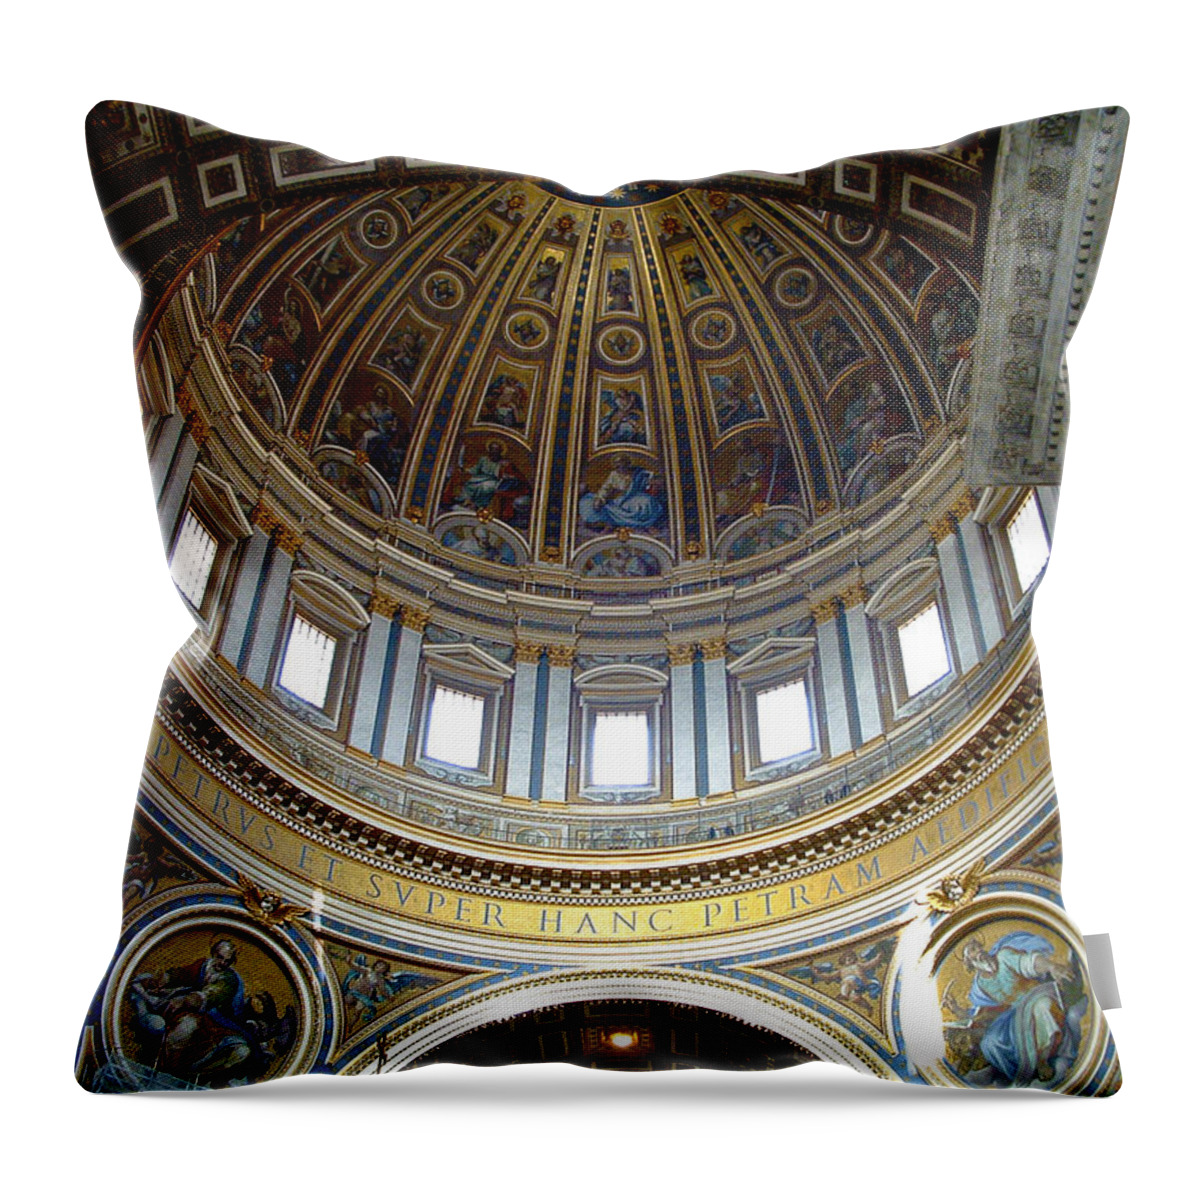 Vatican Throw Pillow featuring the photograph St. Peters Basilica Dome by Roger Passman